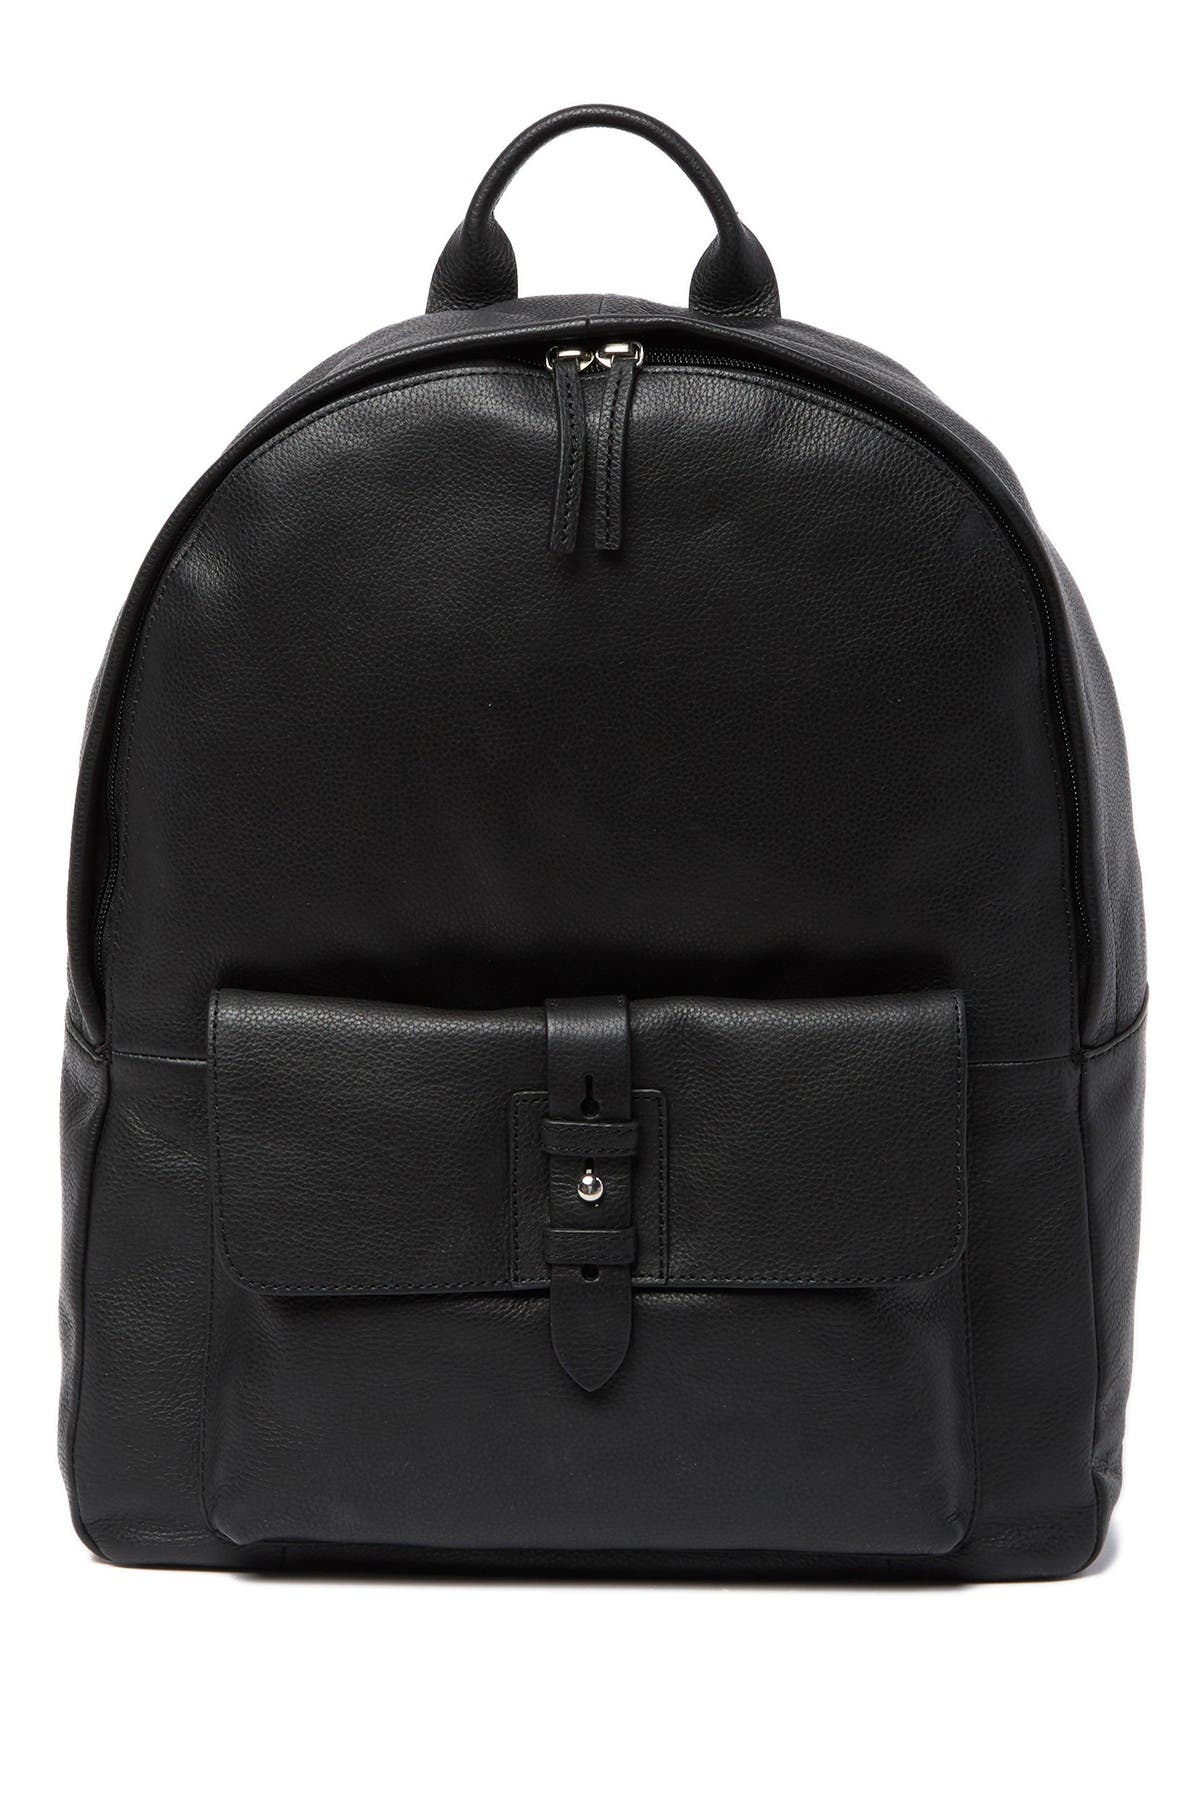 Cole Haan | Leather Backpack | Nordstrom Rack